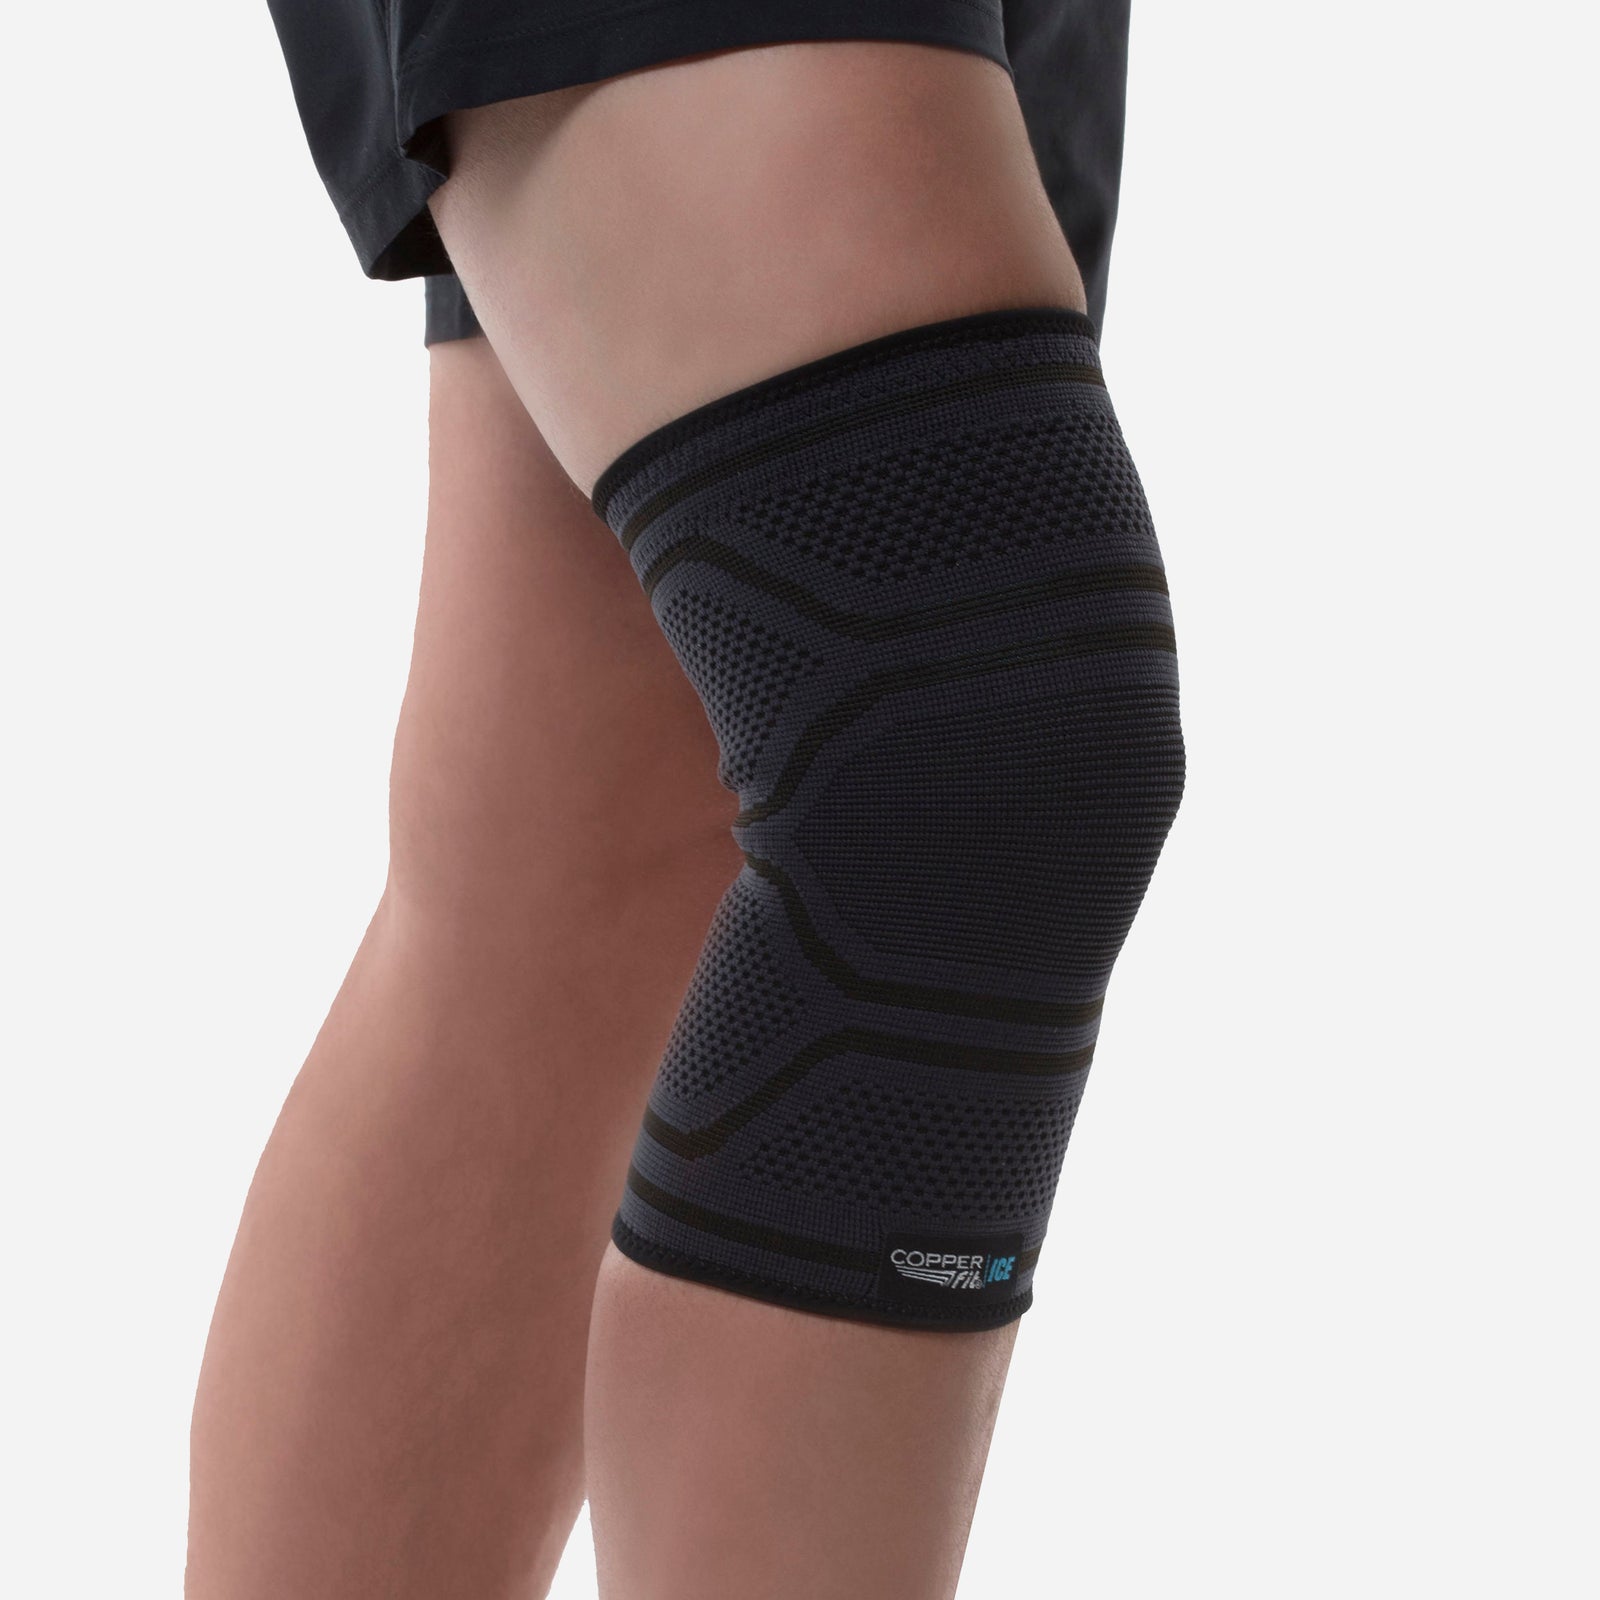 Compression Knee Sleeves, Wraps & Braces - Copper Fit